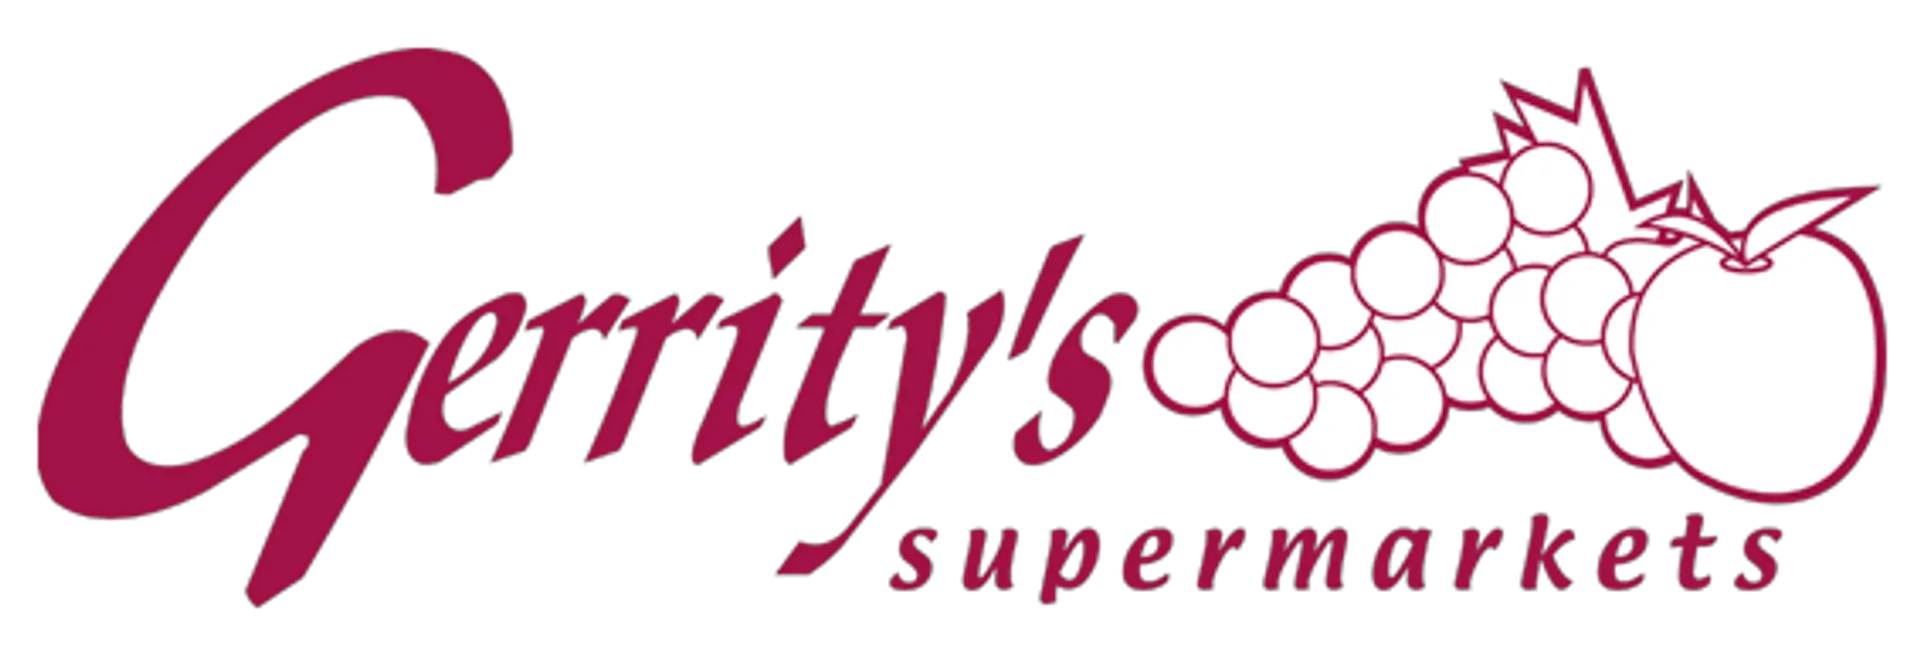 GERRITY'S SUPERMARKETS logo current weekly ad